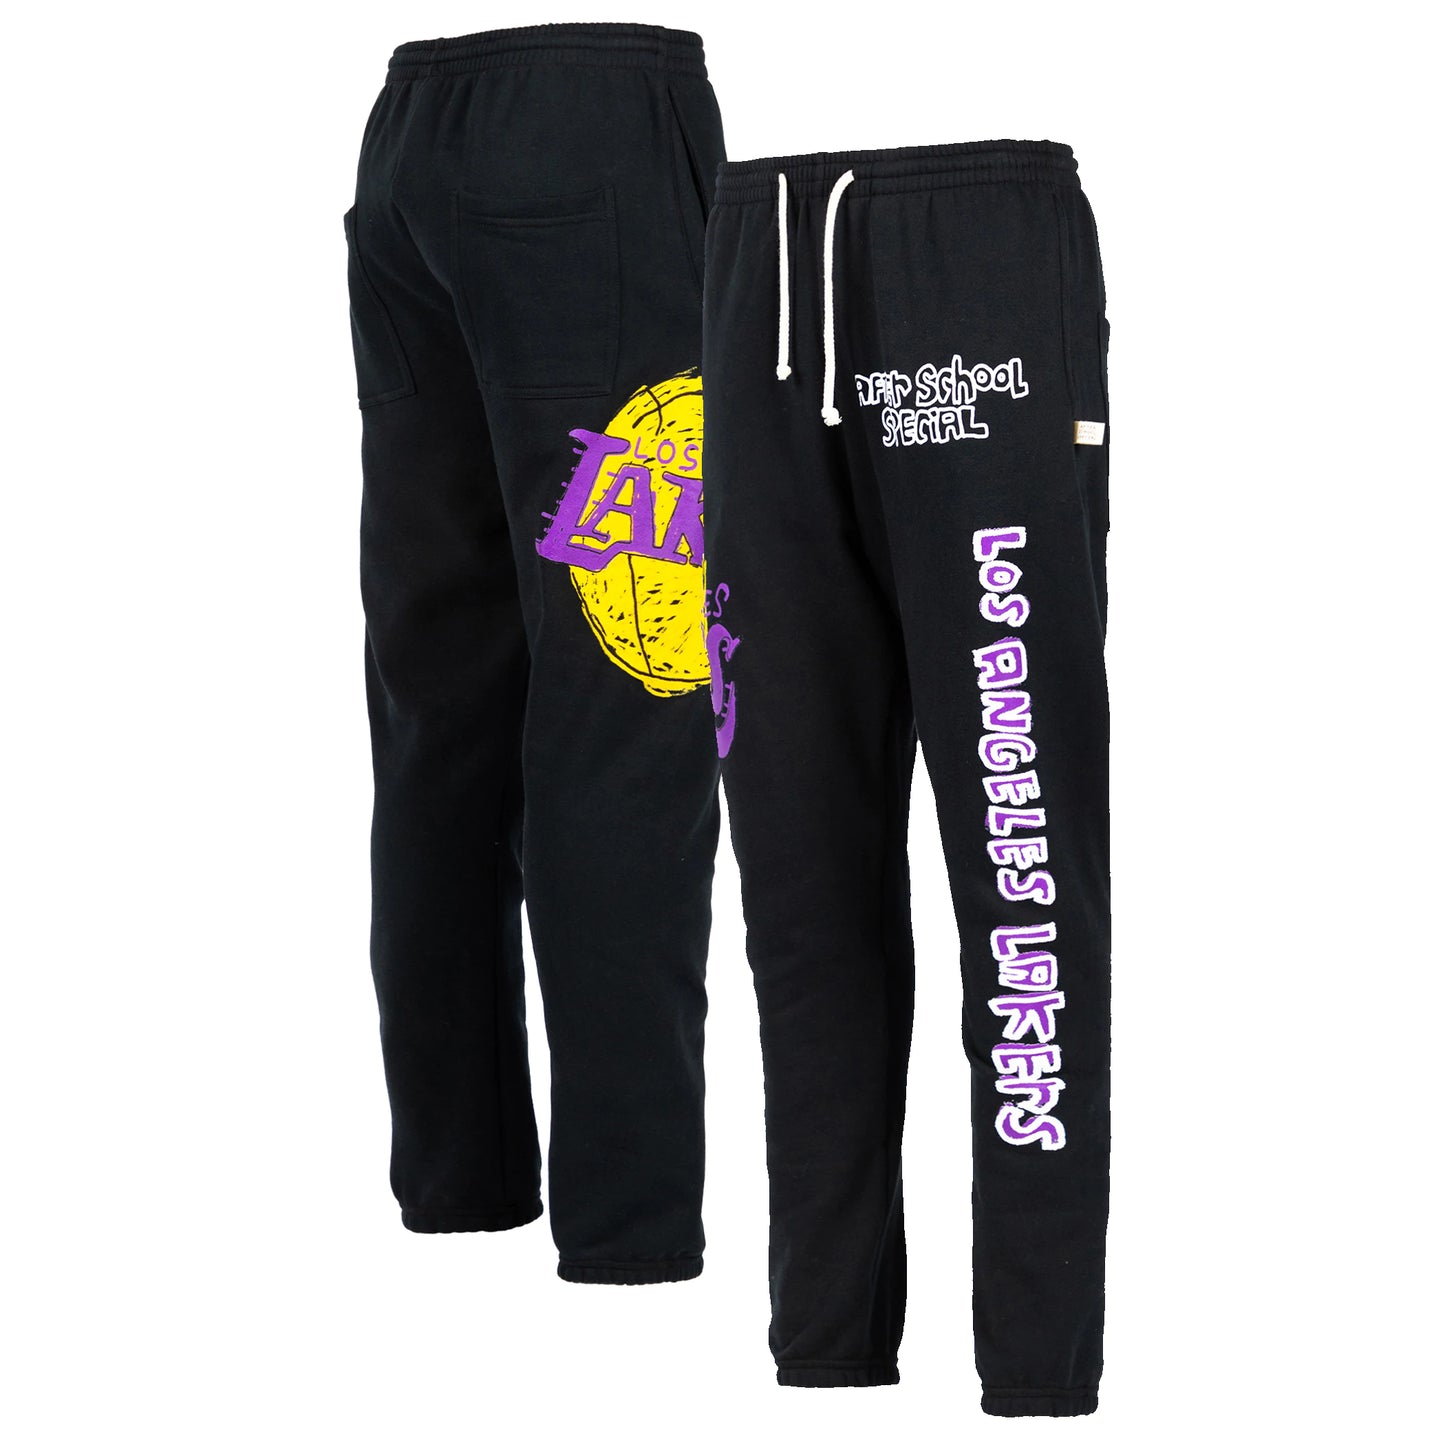 after school special black lakers sweatpants - 8586